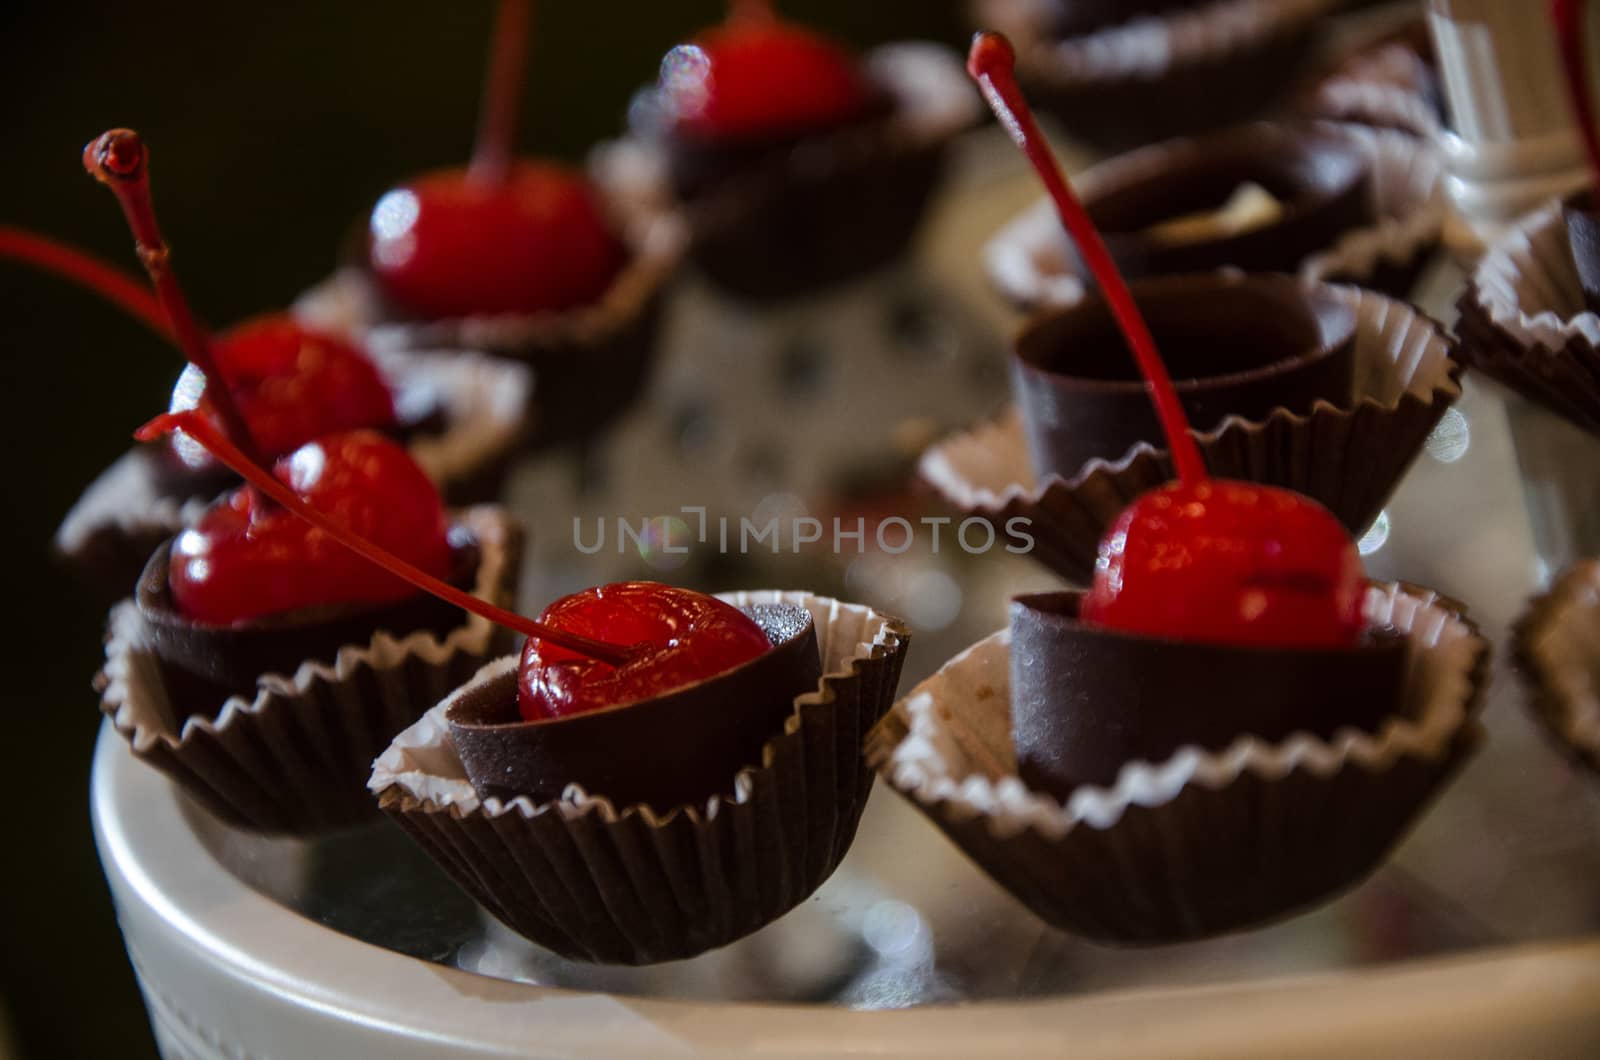 Decoration on a candy table with a cherry covered with chocolate